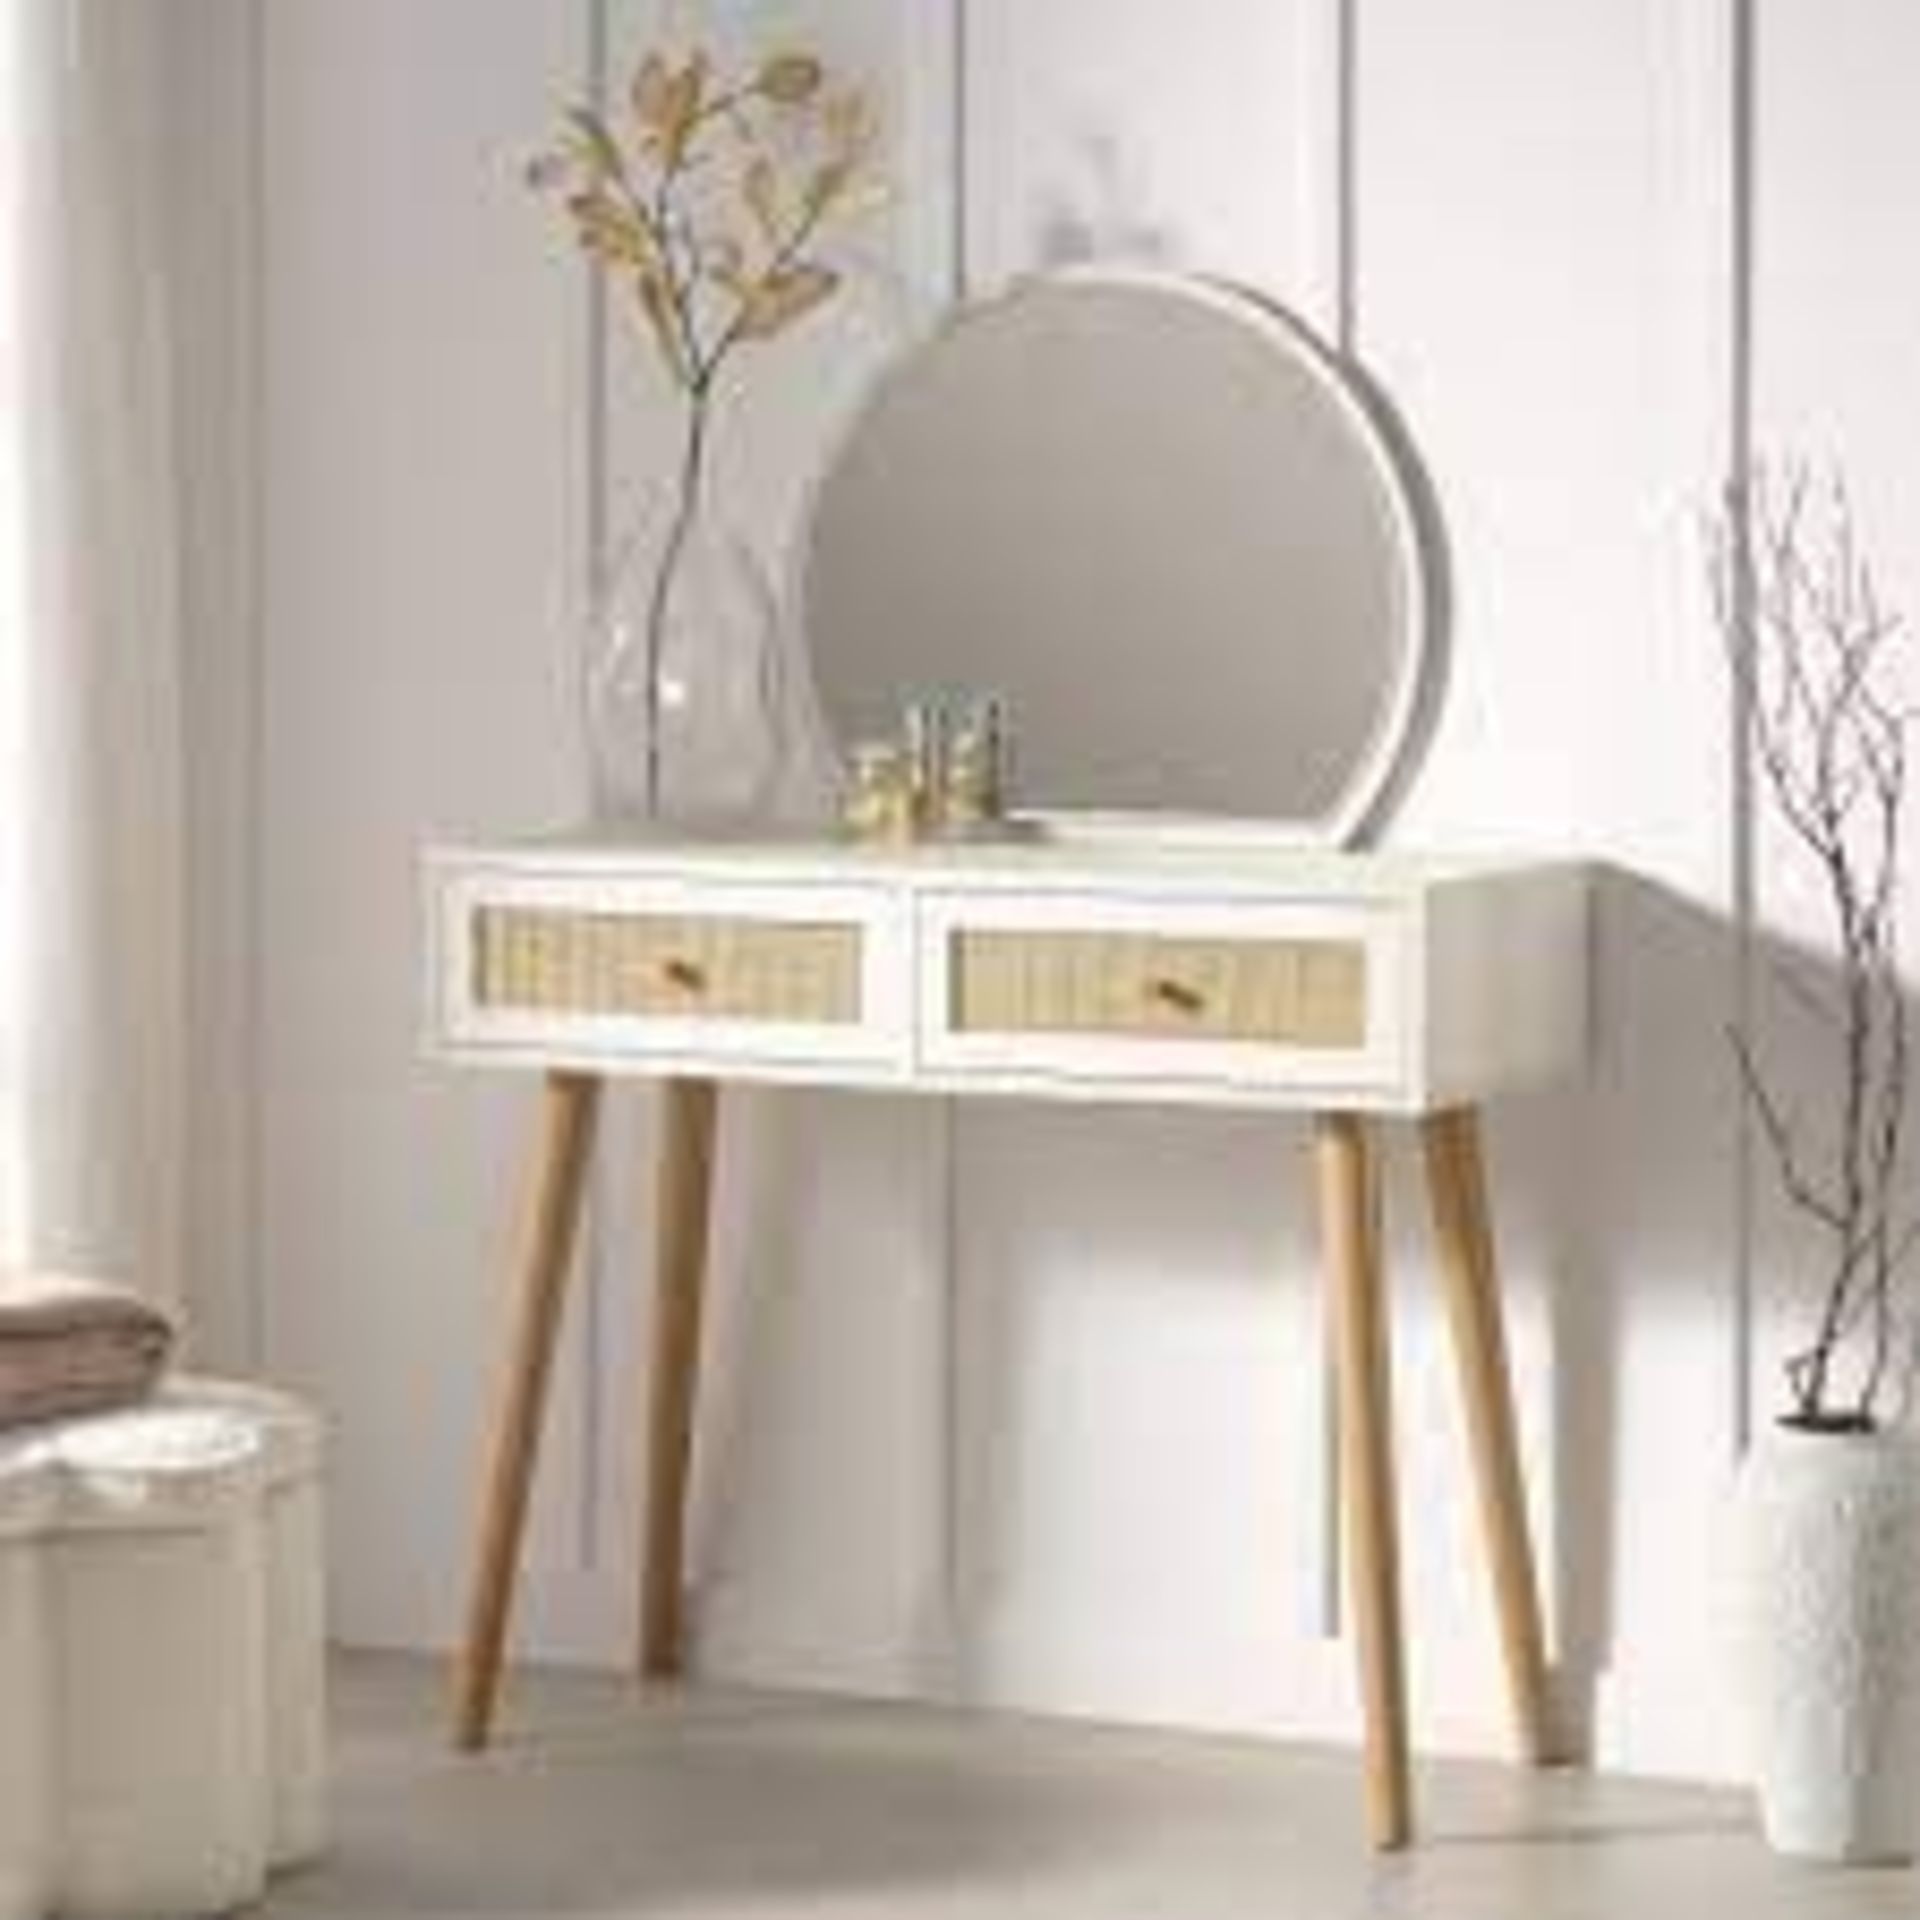 Frances Woven Rattan Dressing Table with Mirror, White. - SR5. Natural materials meets